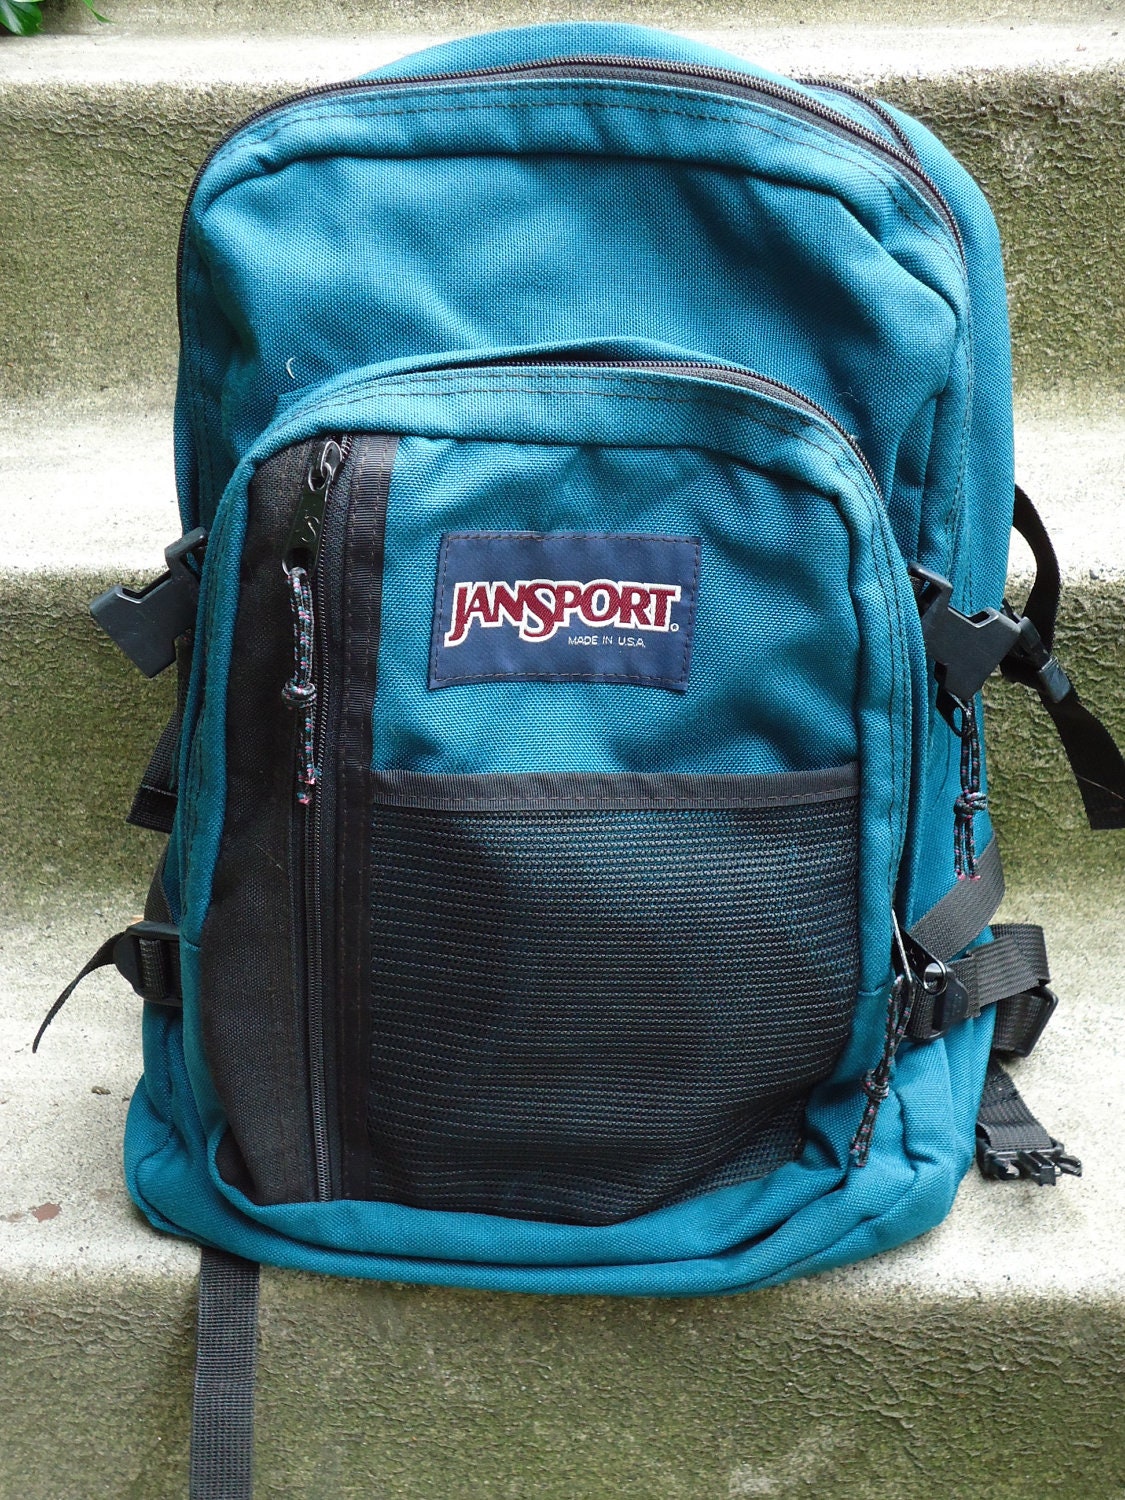 Vintage JANSPORT BACKPACK Made In USA by fallonscloset on Etsy